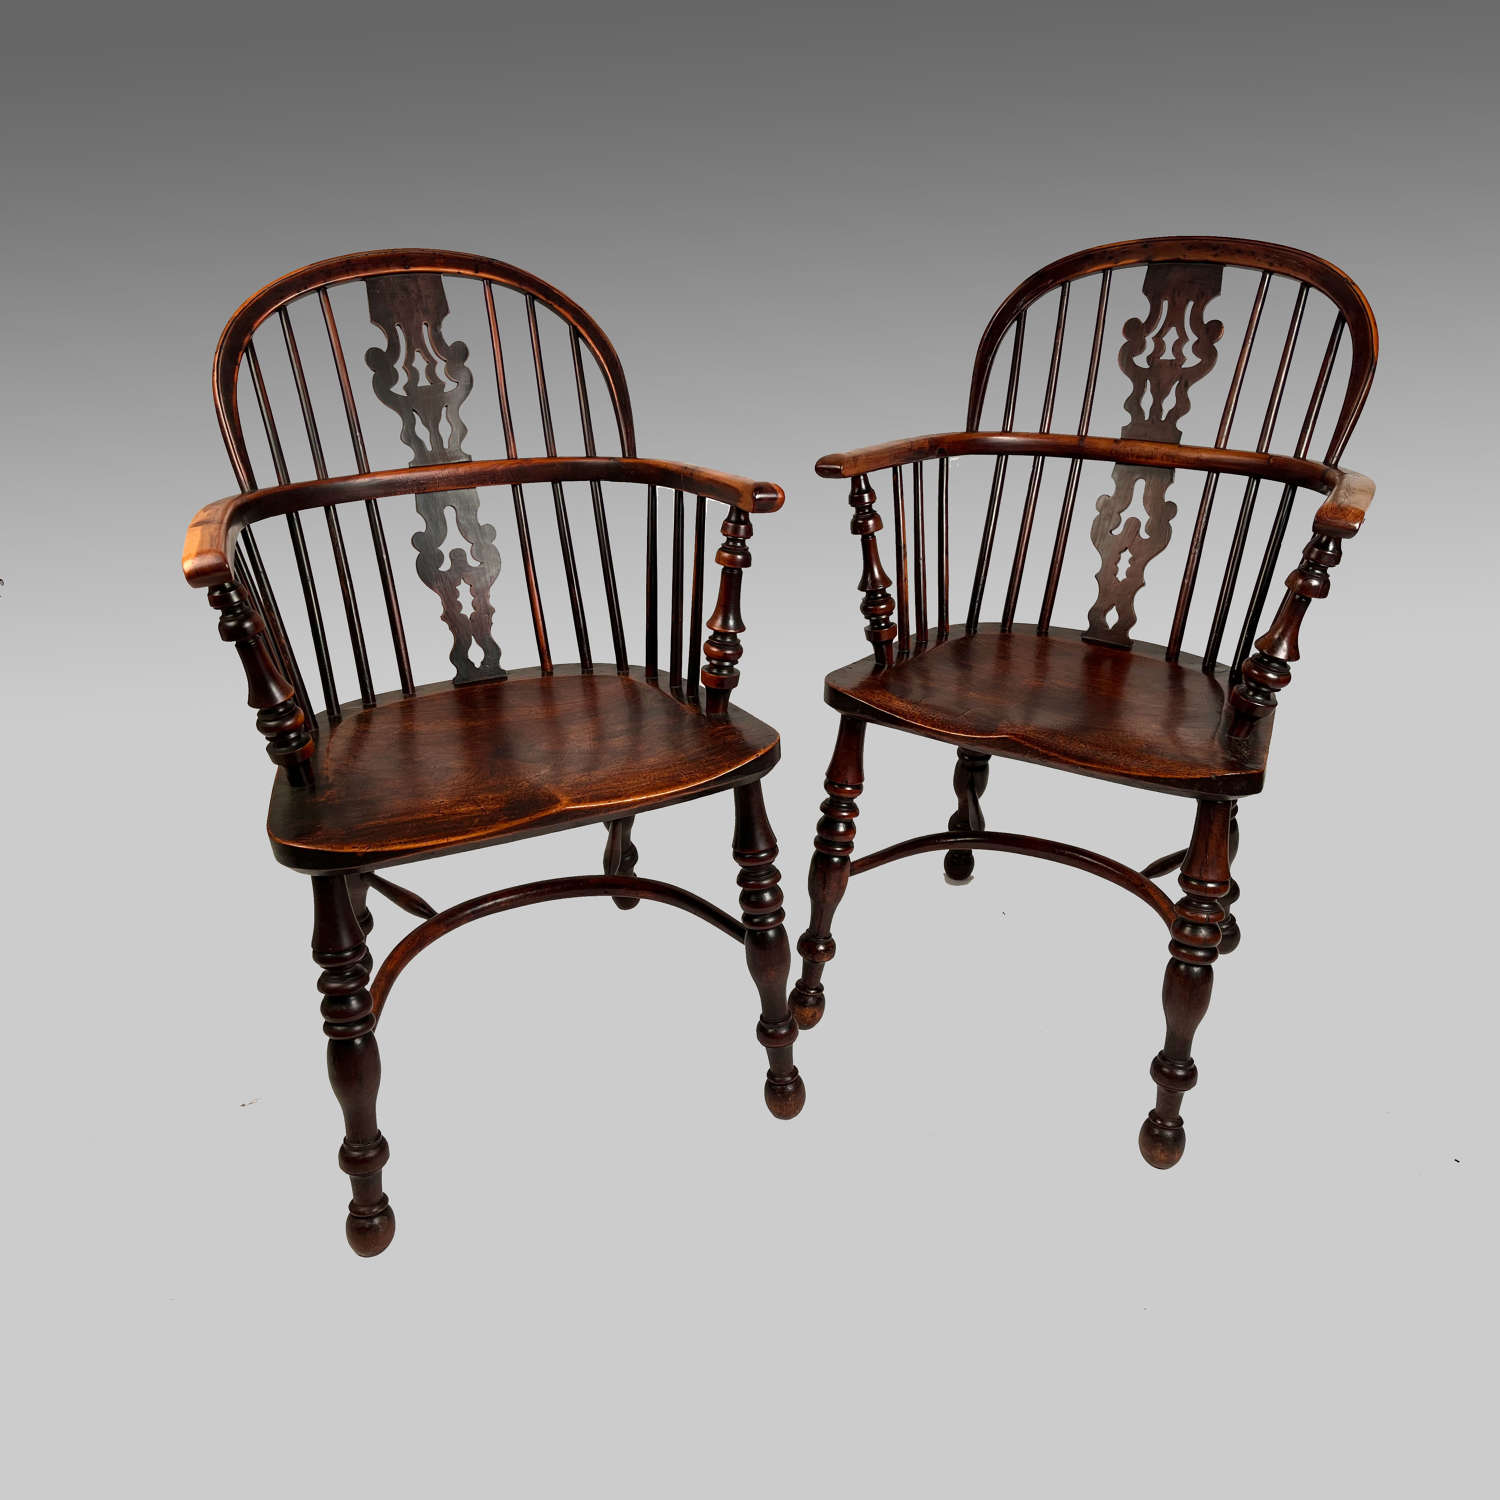 Pair of lowback yew wood Windsor armchairs